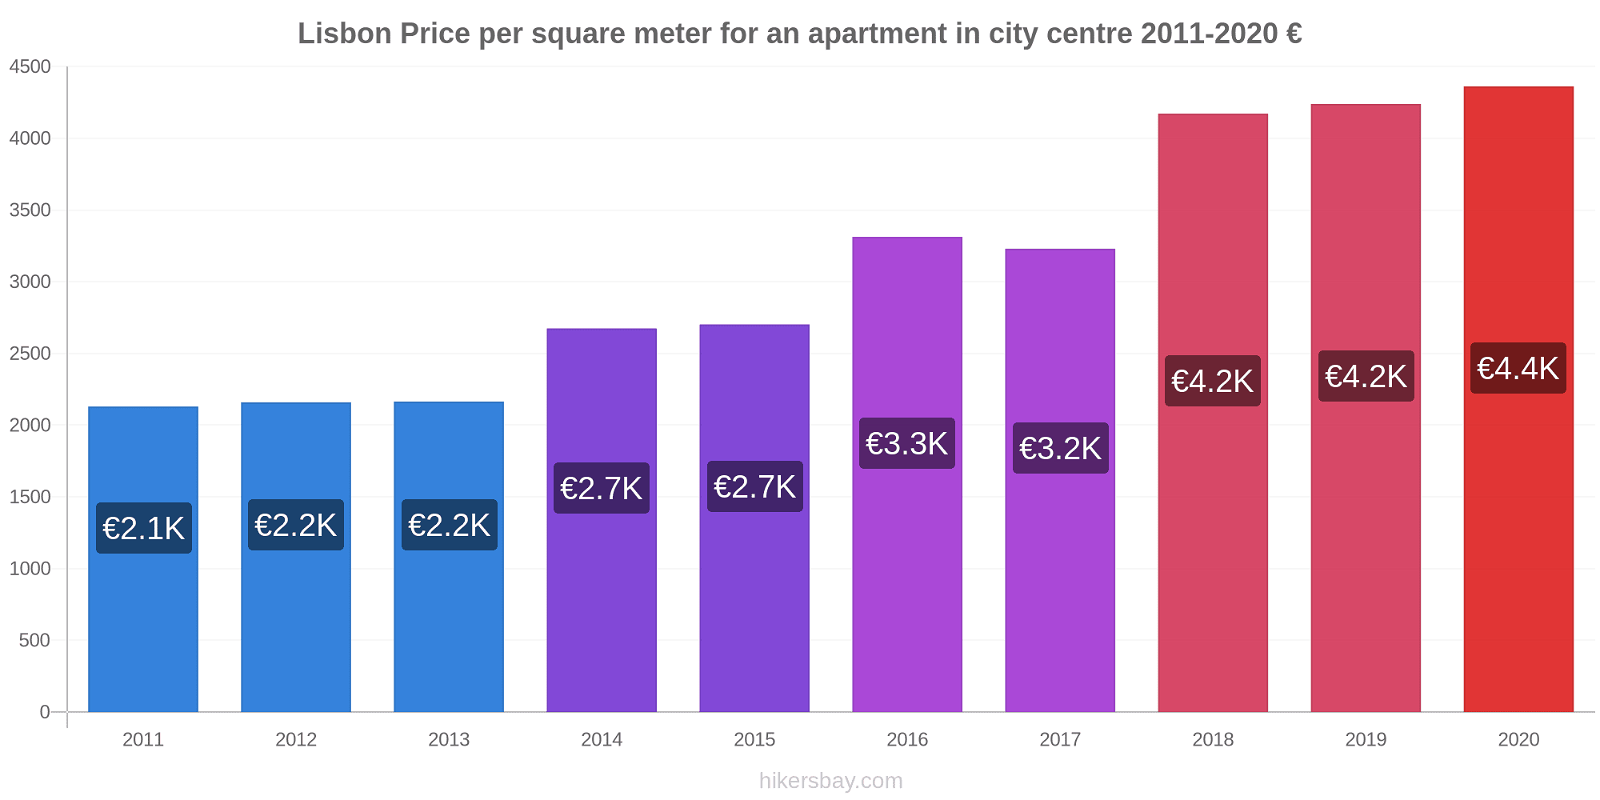 Lisbon price changes Price per square meter for an apartment in city centre hikersbay.com